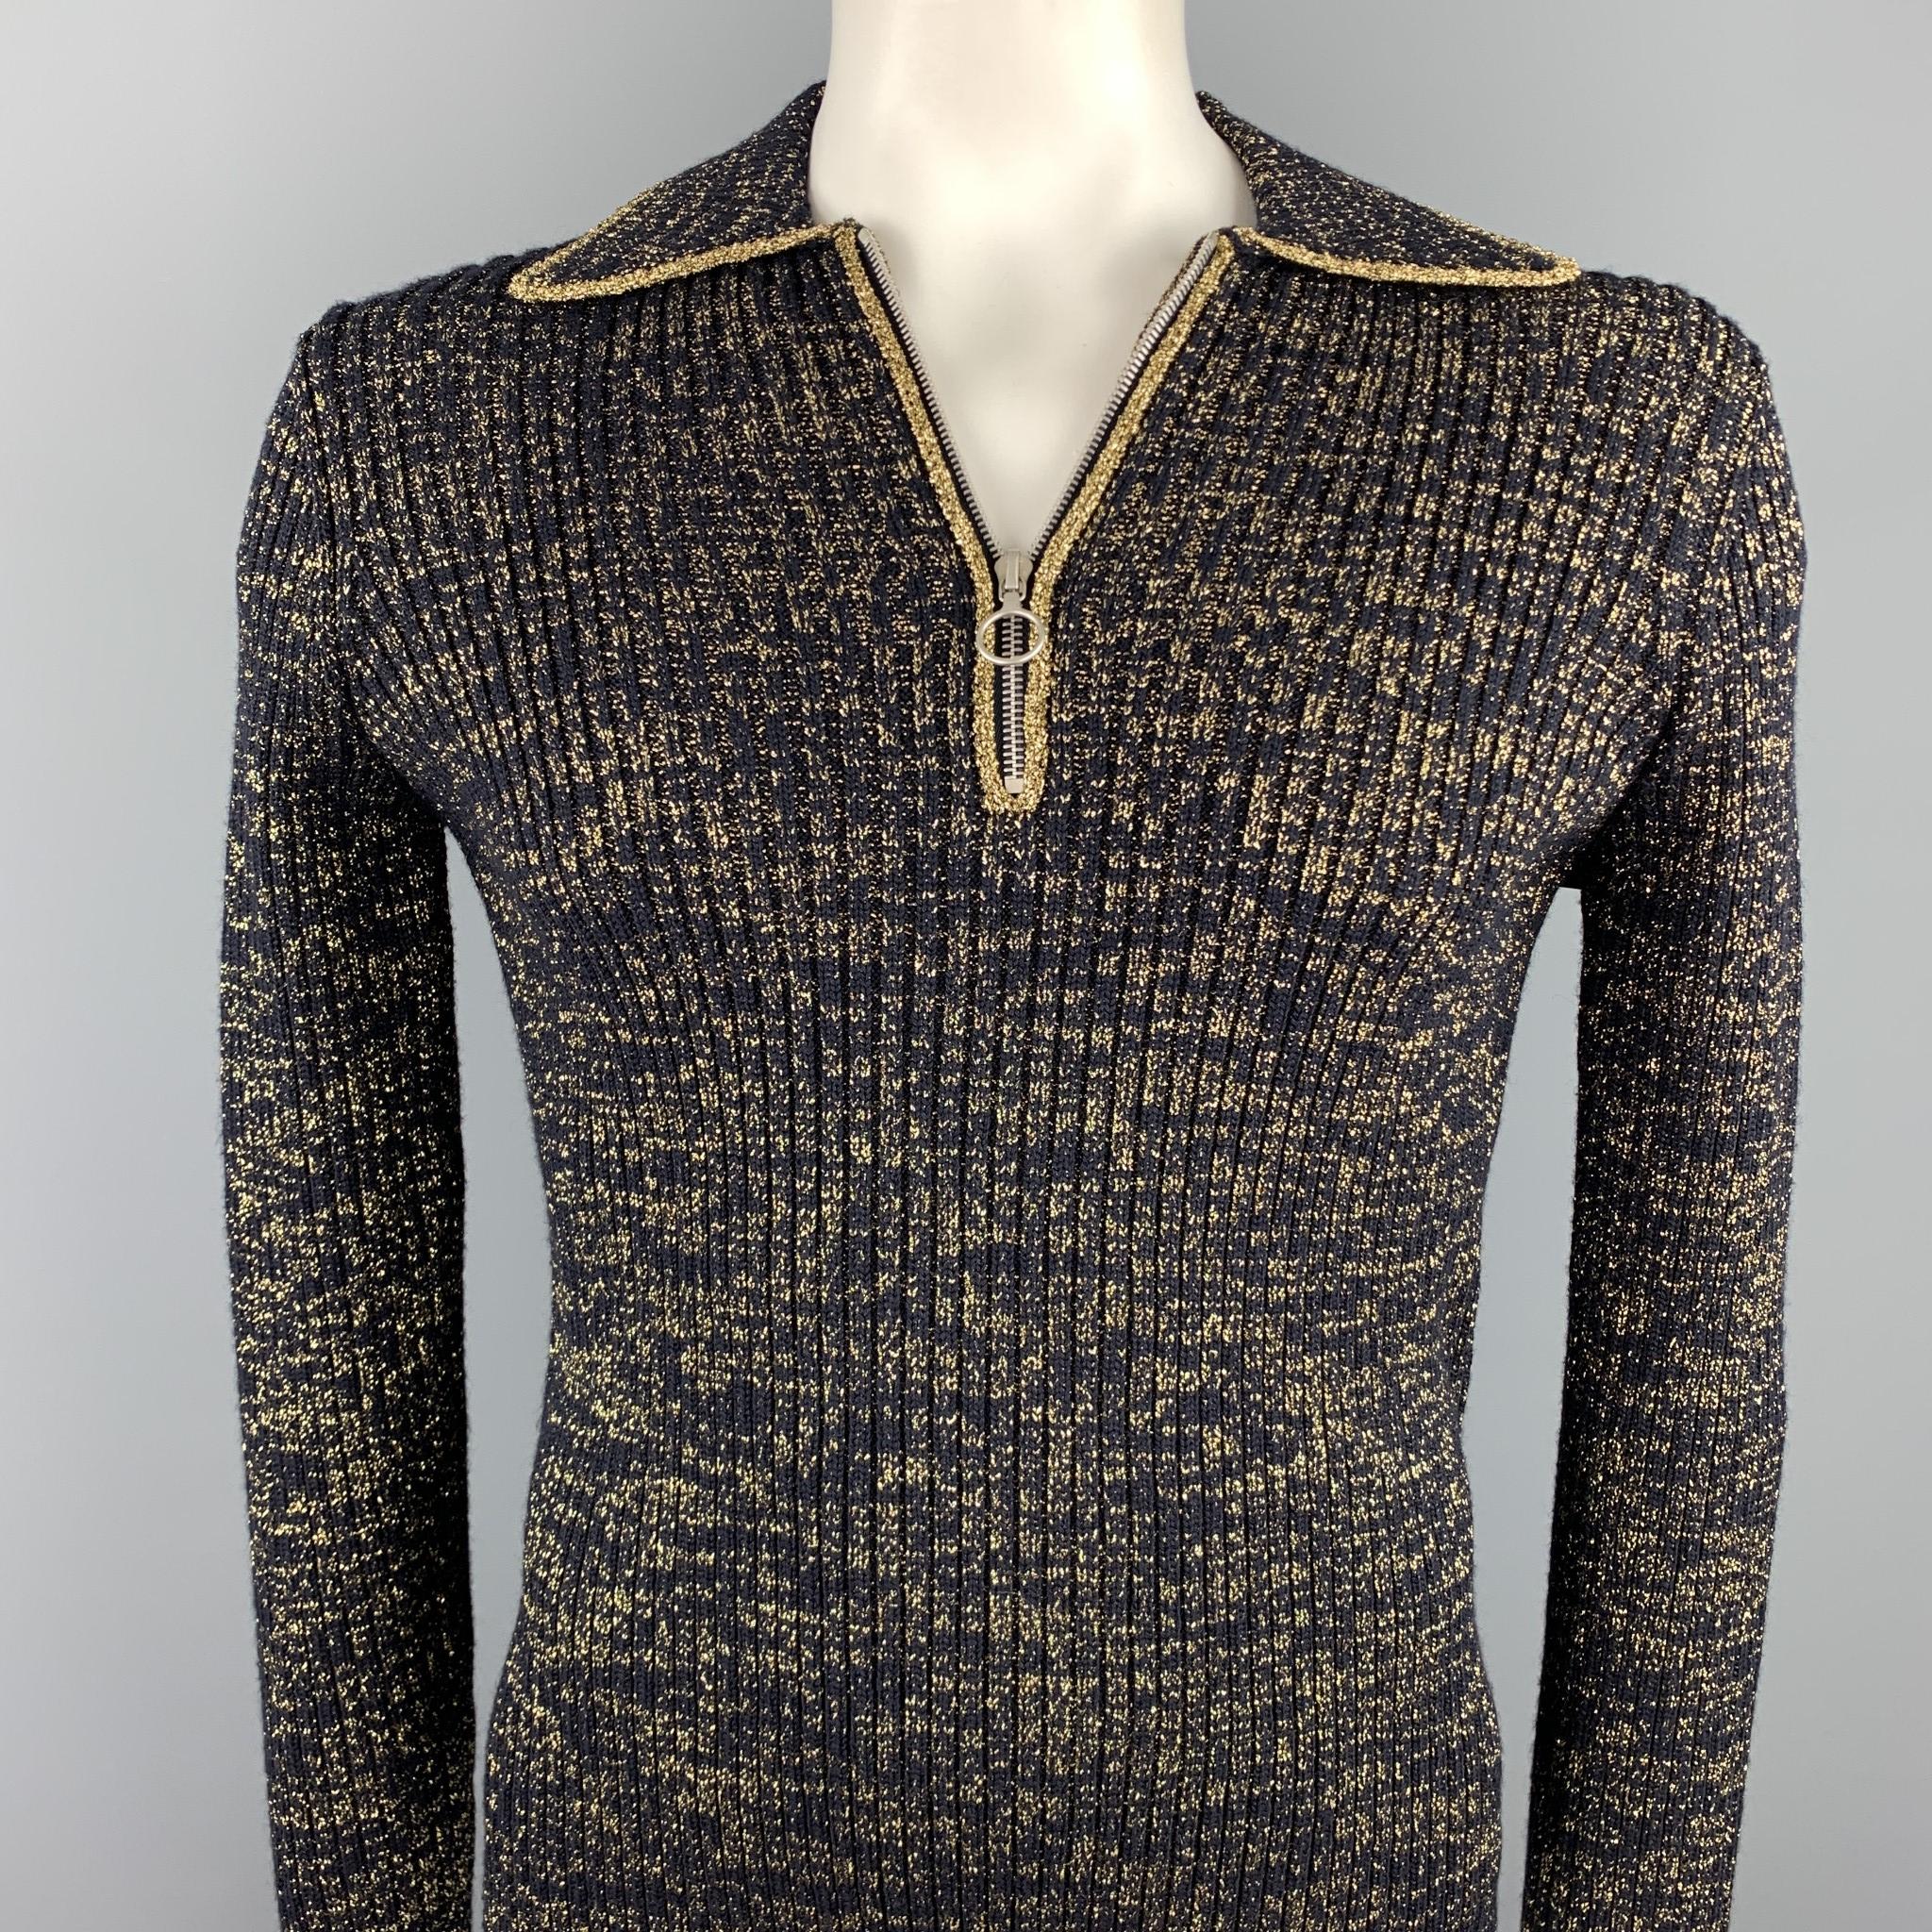 DRIES VAN NOTEN pullover comes in a black & gold ribbed knit wool blend featuring a pointed collar and a half zip closure. Made in Belgium. 

Excellent Pre-Owned Condition.
Marked: L

Measurements:

Shoulder: 17 in. 
Chest: 38 in.
Sleeve: 26 in.